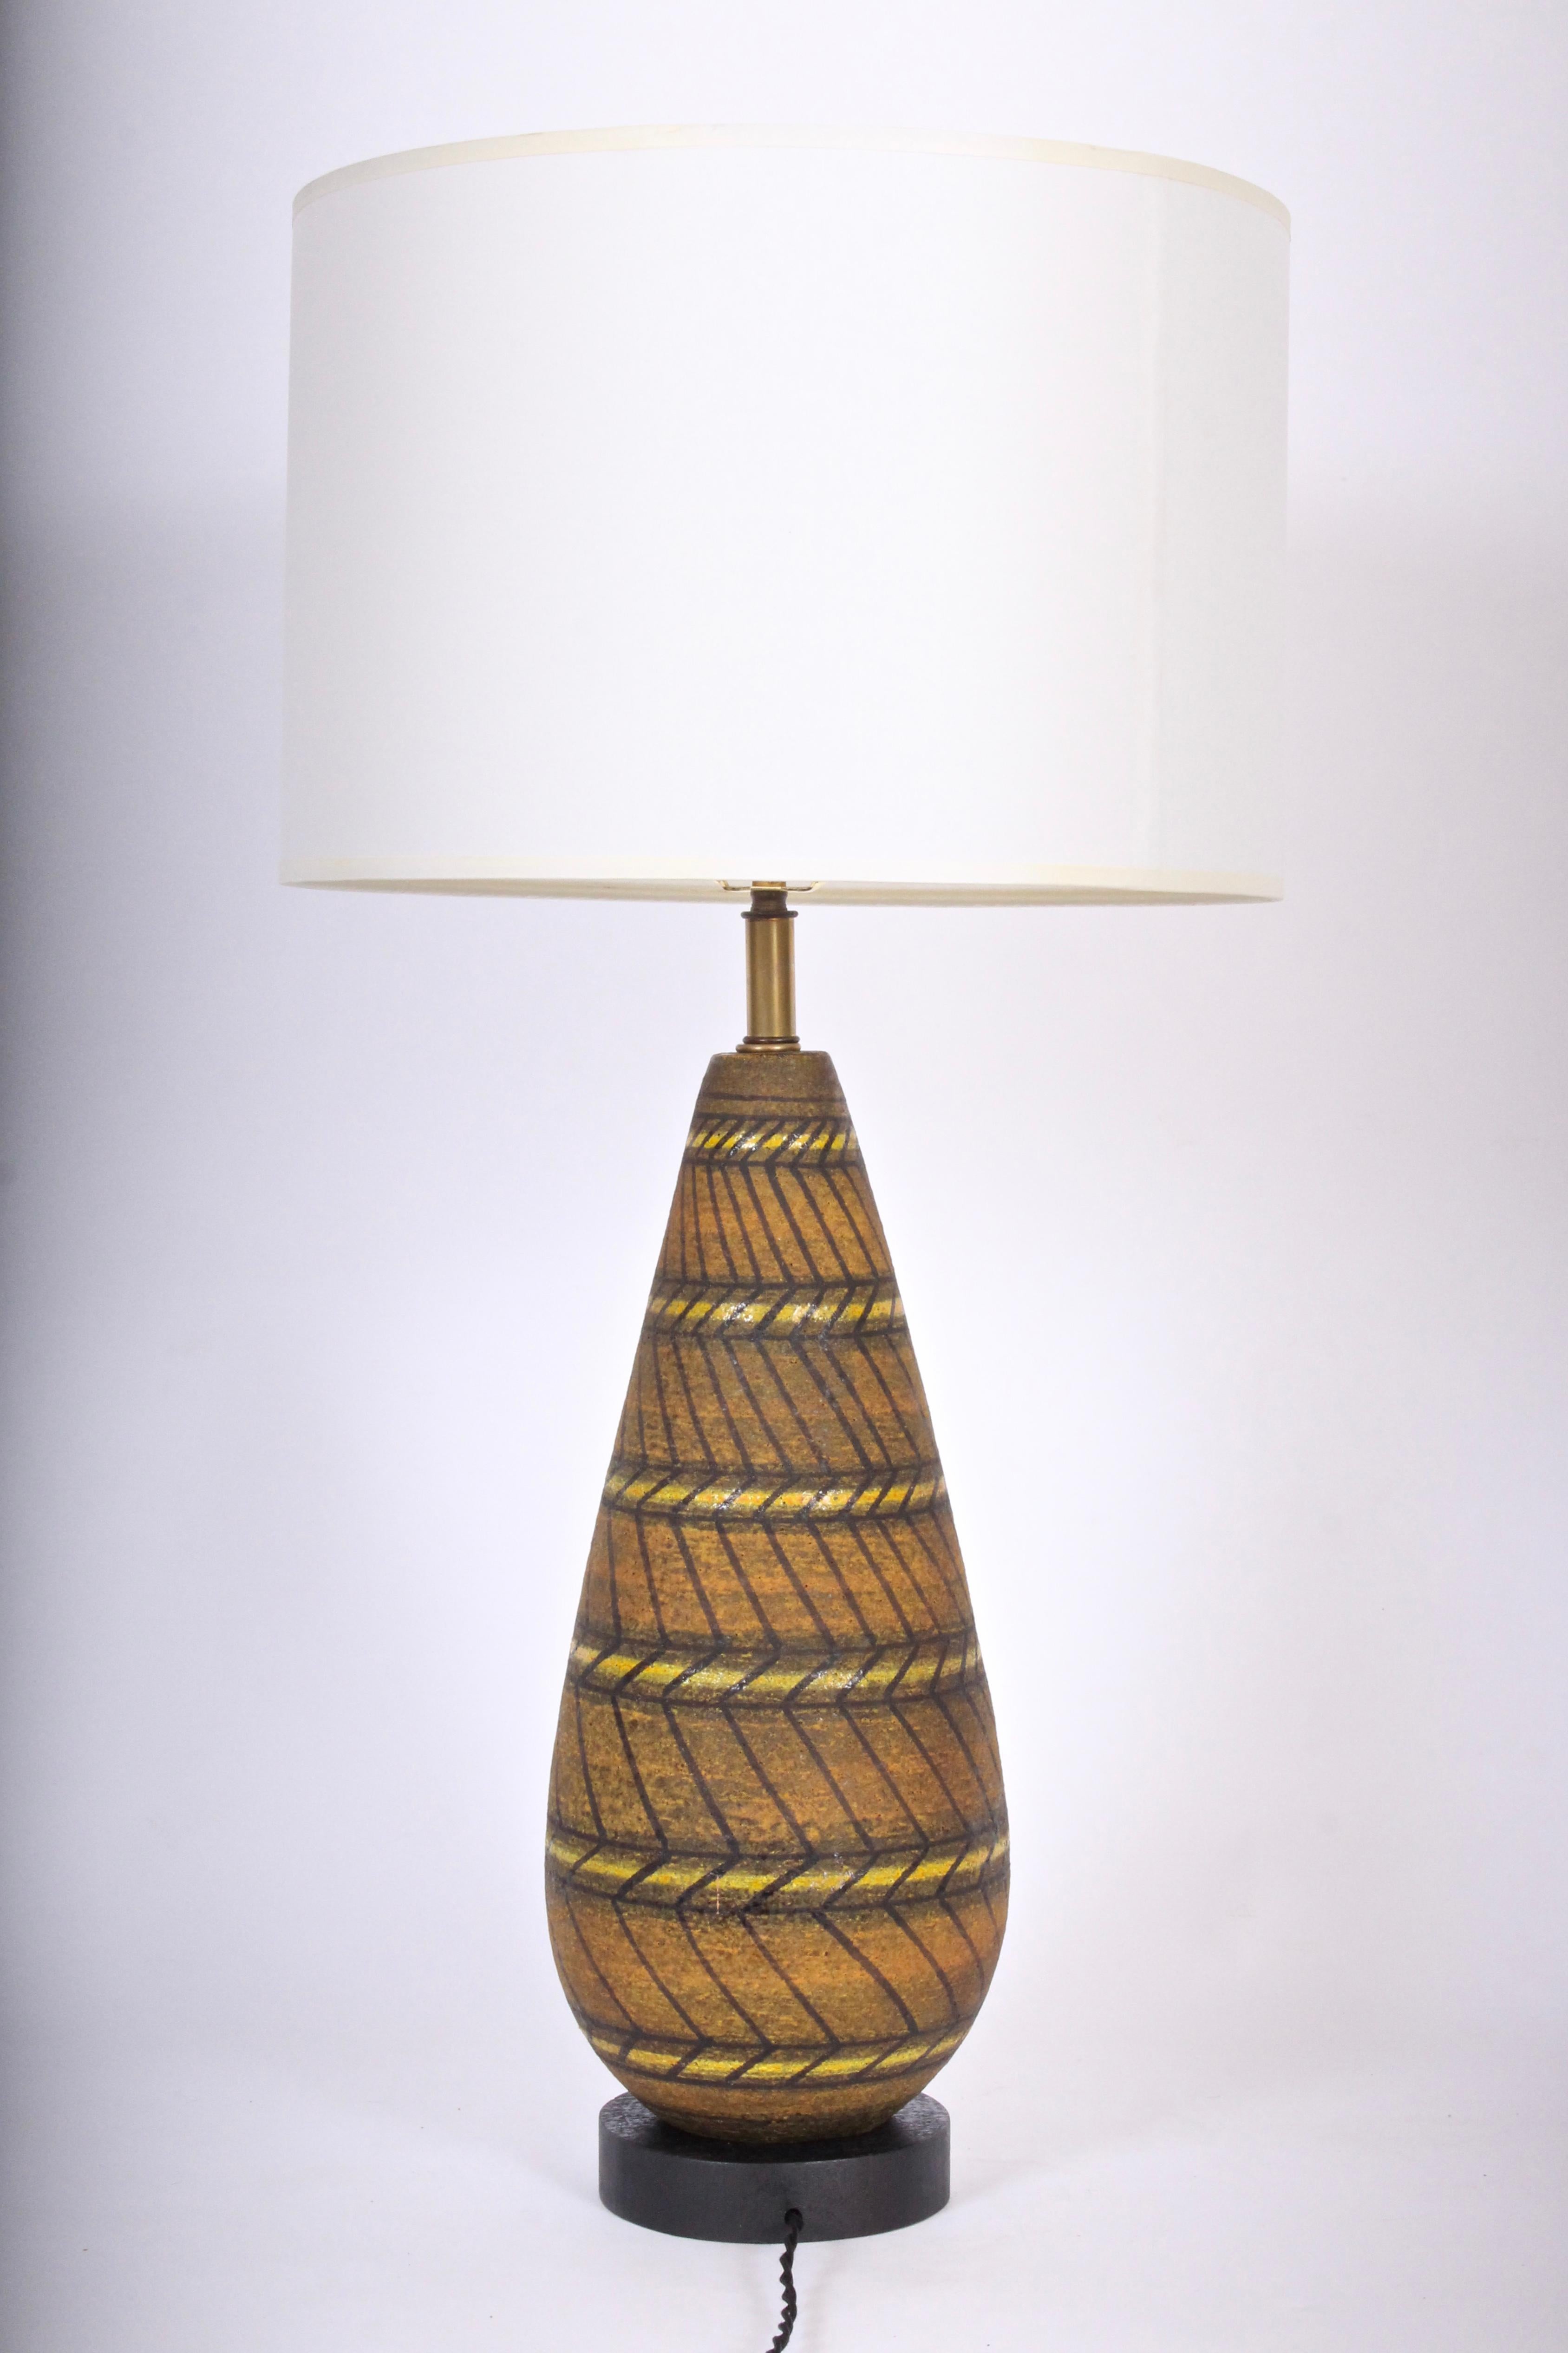 Aldo Londi Geometric Cocoa Art Pottery Table Lamp Hand Painted in Yellow, 1950s For Sale 1